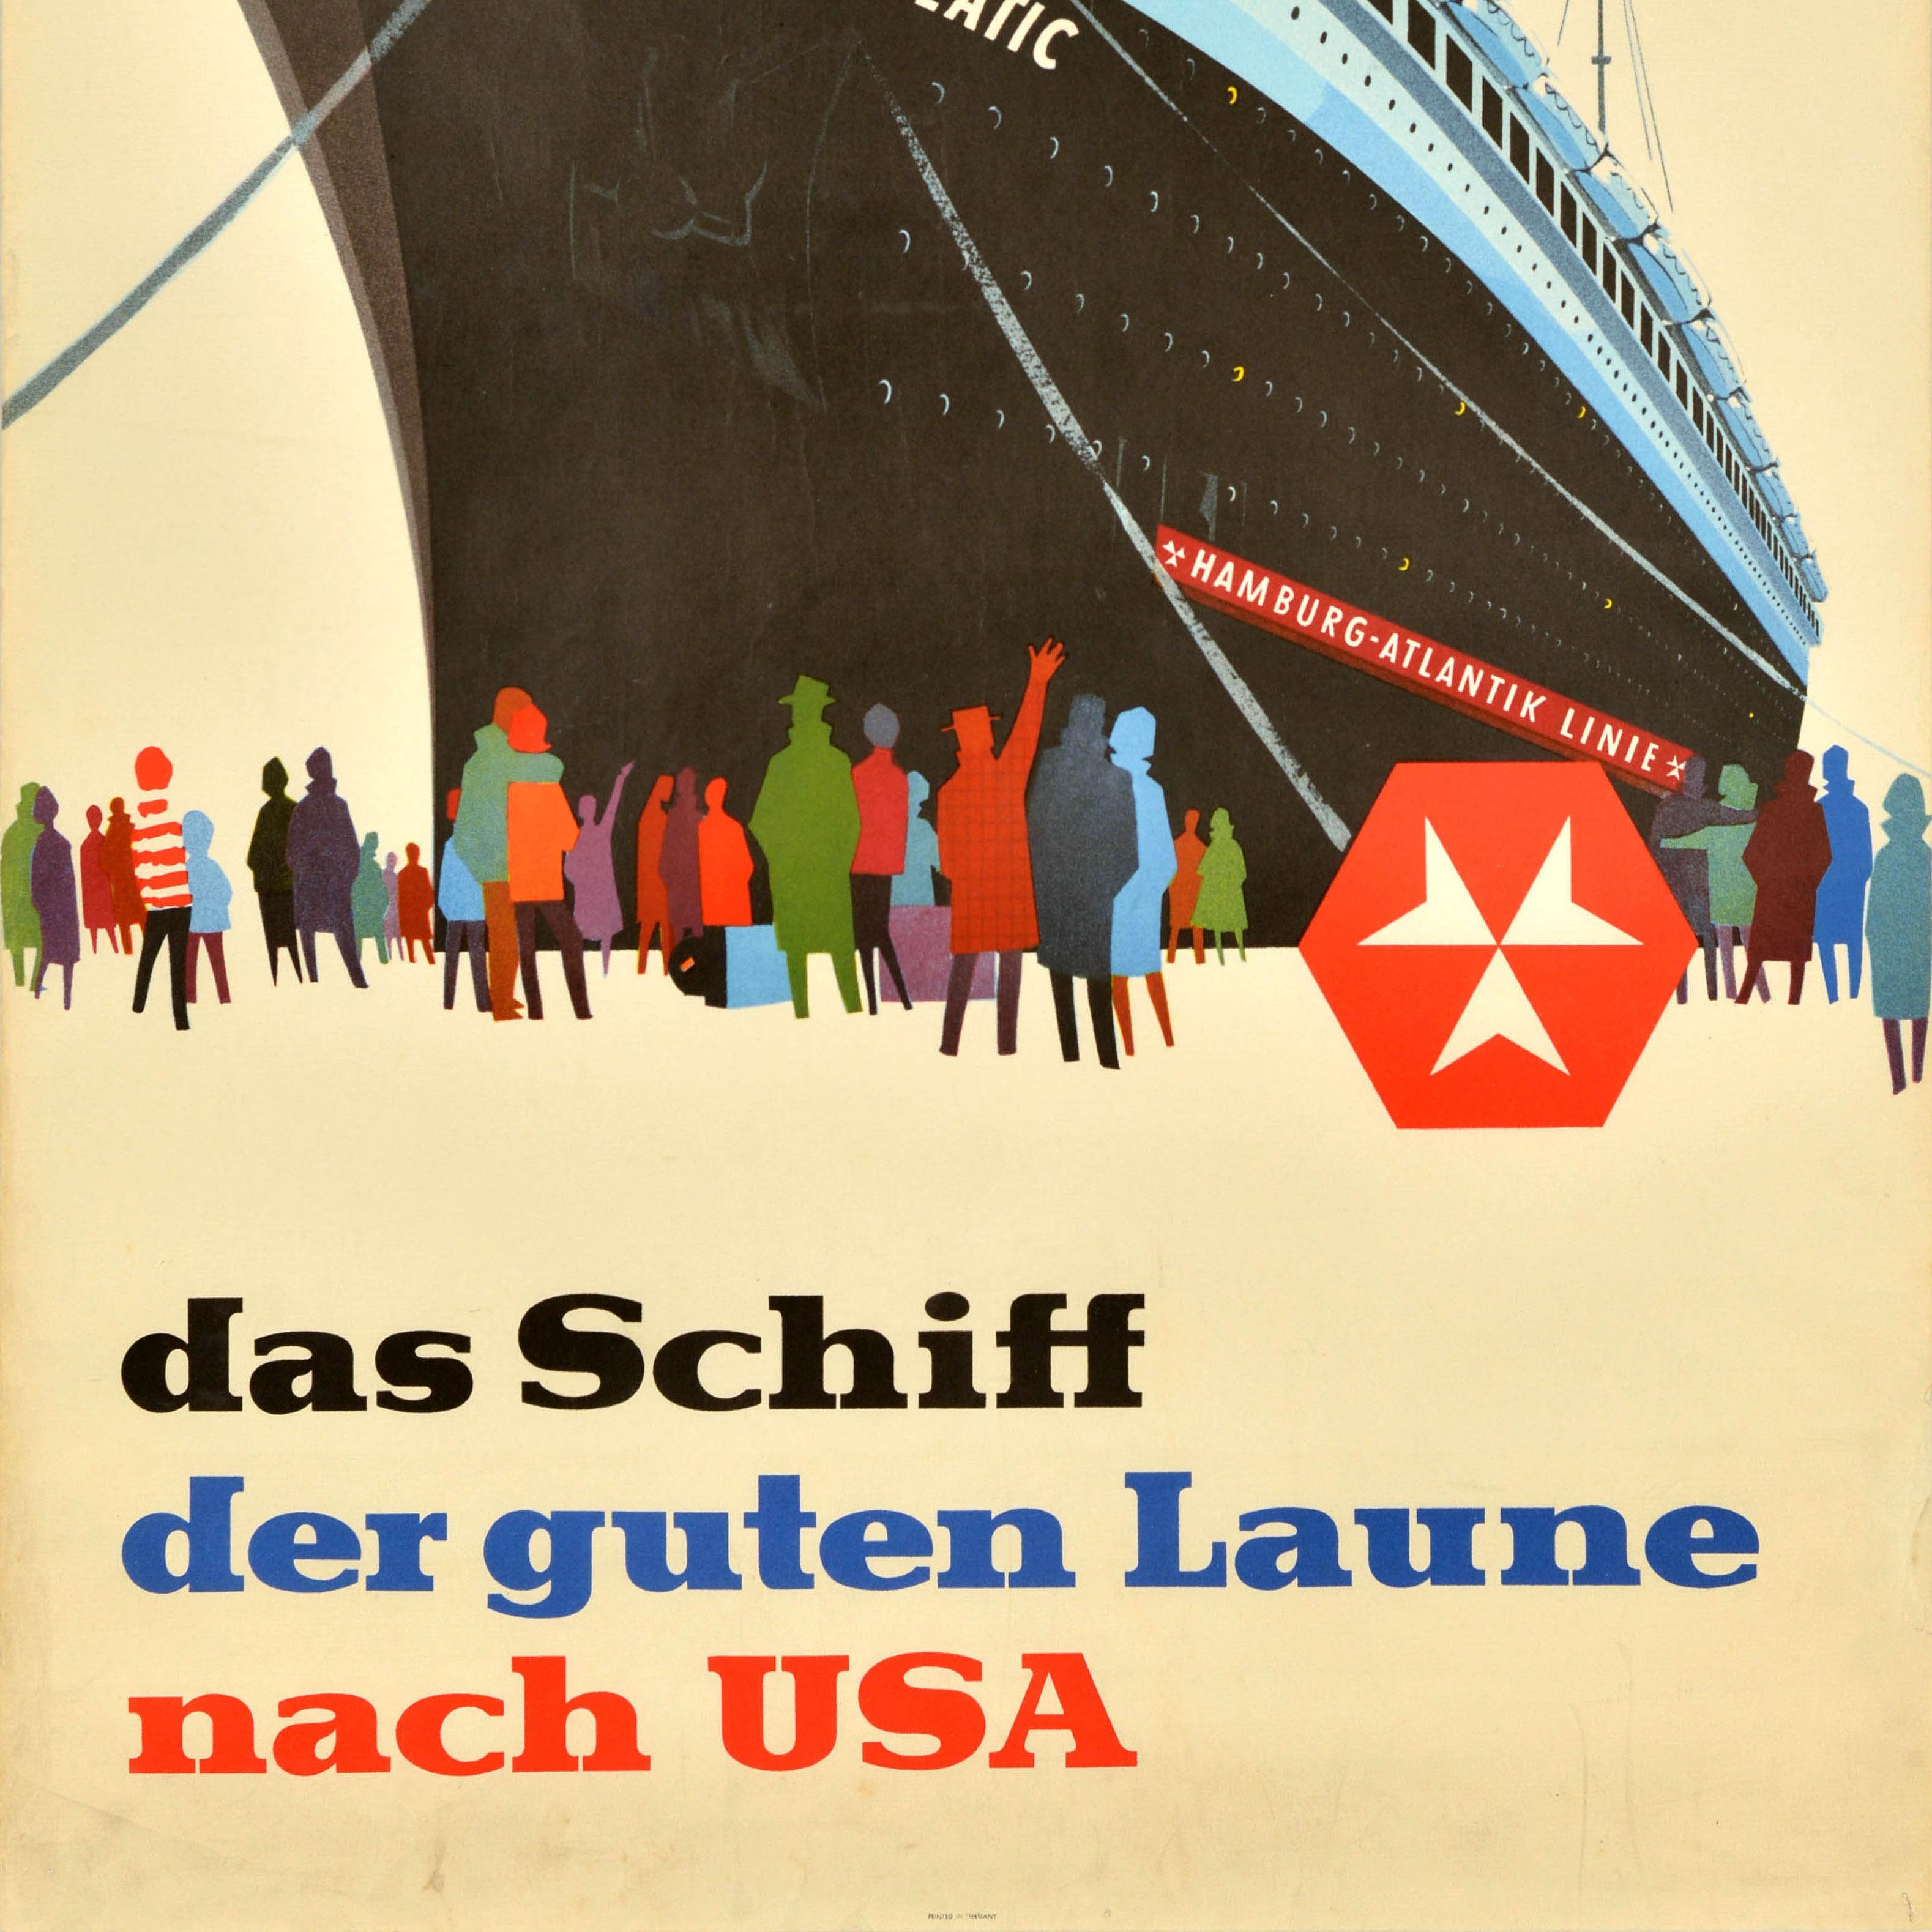 Original vintage cruise travel advertising poster for Hamburg Atlantic Line / Hamburg Atlantik Linie featuring an illustration of people as colourful silhouettes waving to and looking up at a ship named Hanseatic with the text in German below - das